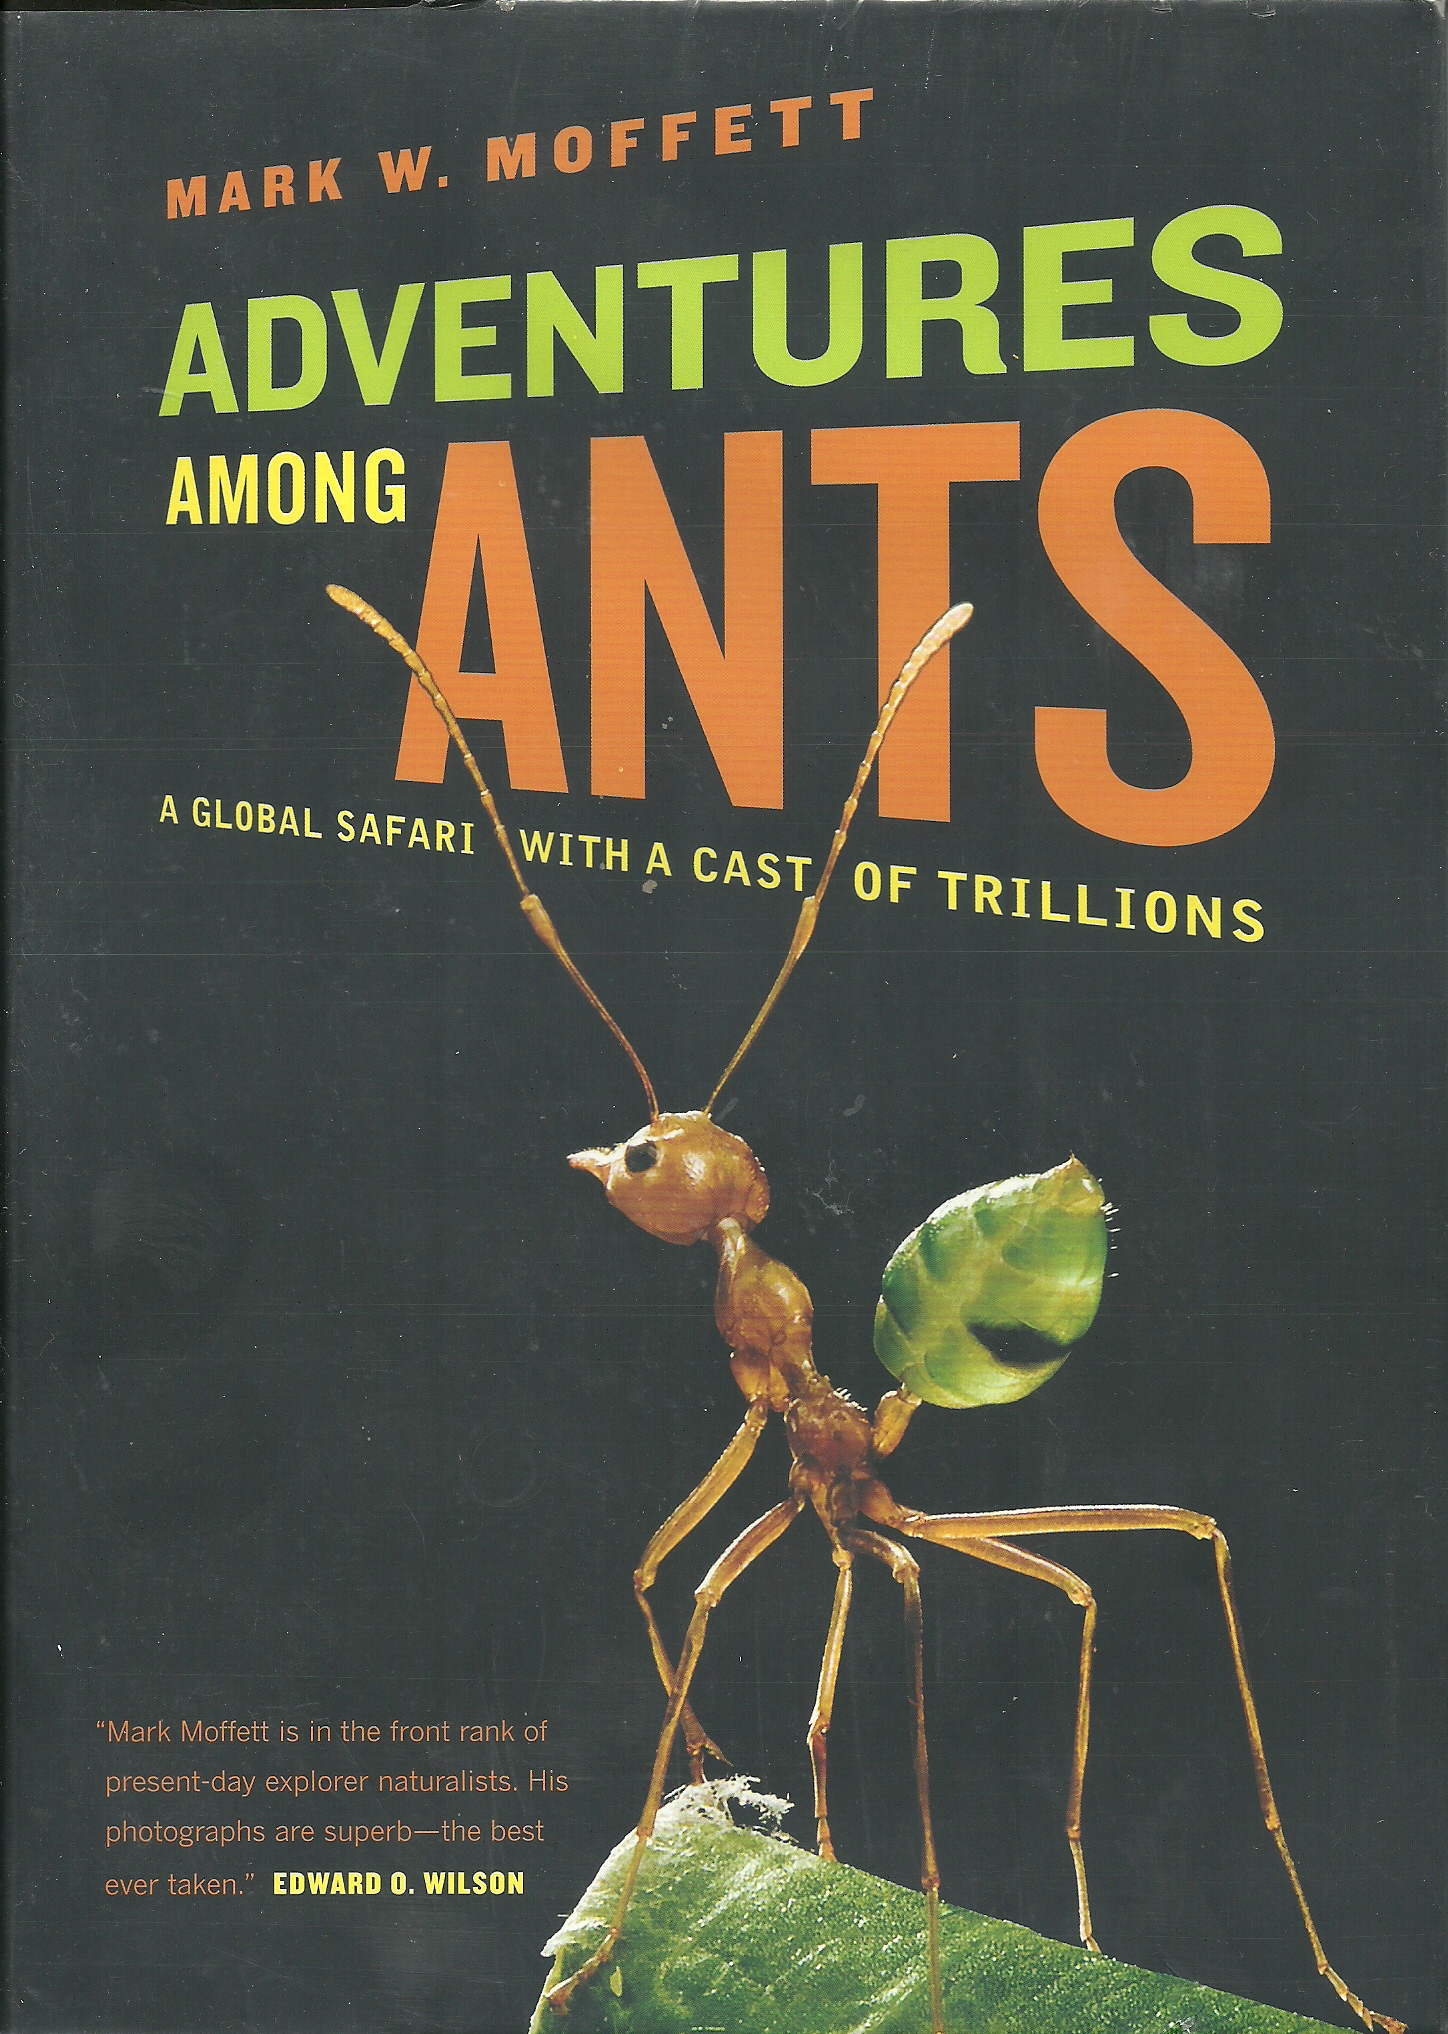 Portada libro Mark W. Moffet (2010) Adventures among Ants. A global safari with a cast of trillions